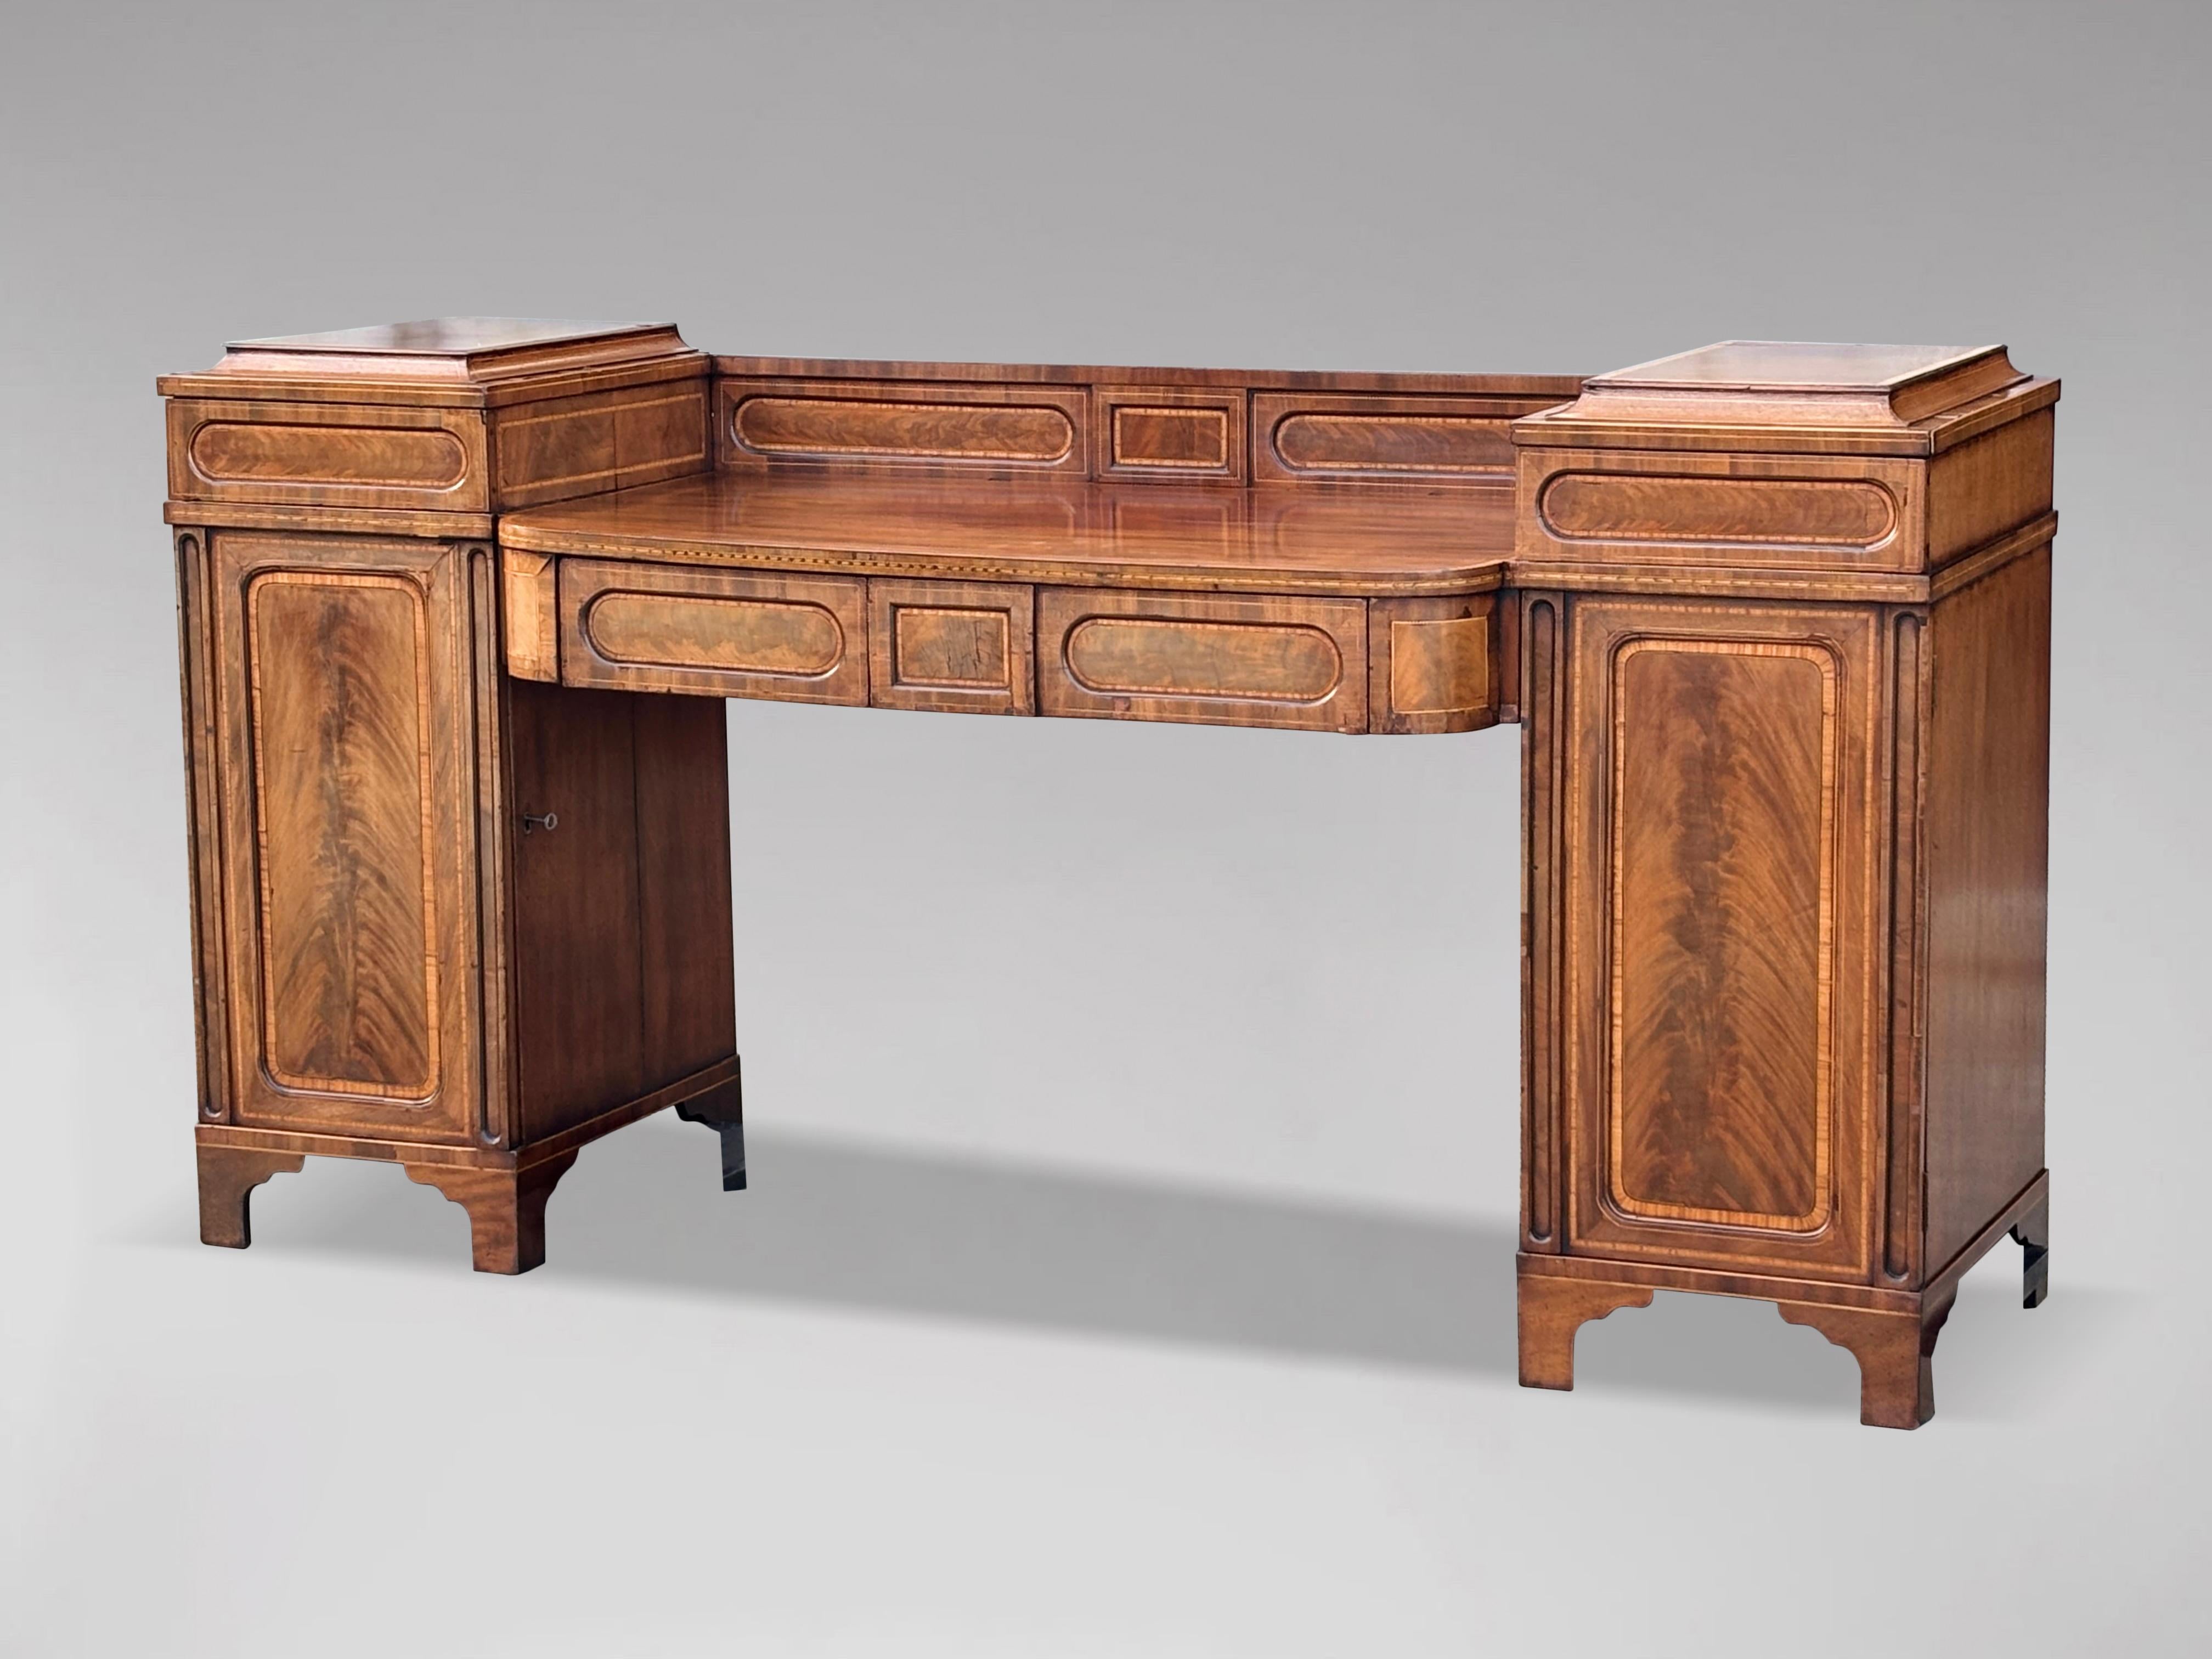 18th Century George III Period Mahogany & Inlay Pedestal Sideboard In Good Condition For Sale In Petworth,West Sussex, GB